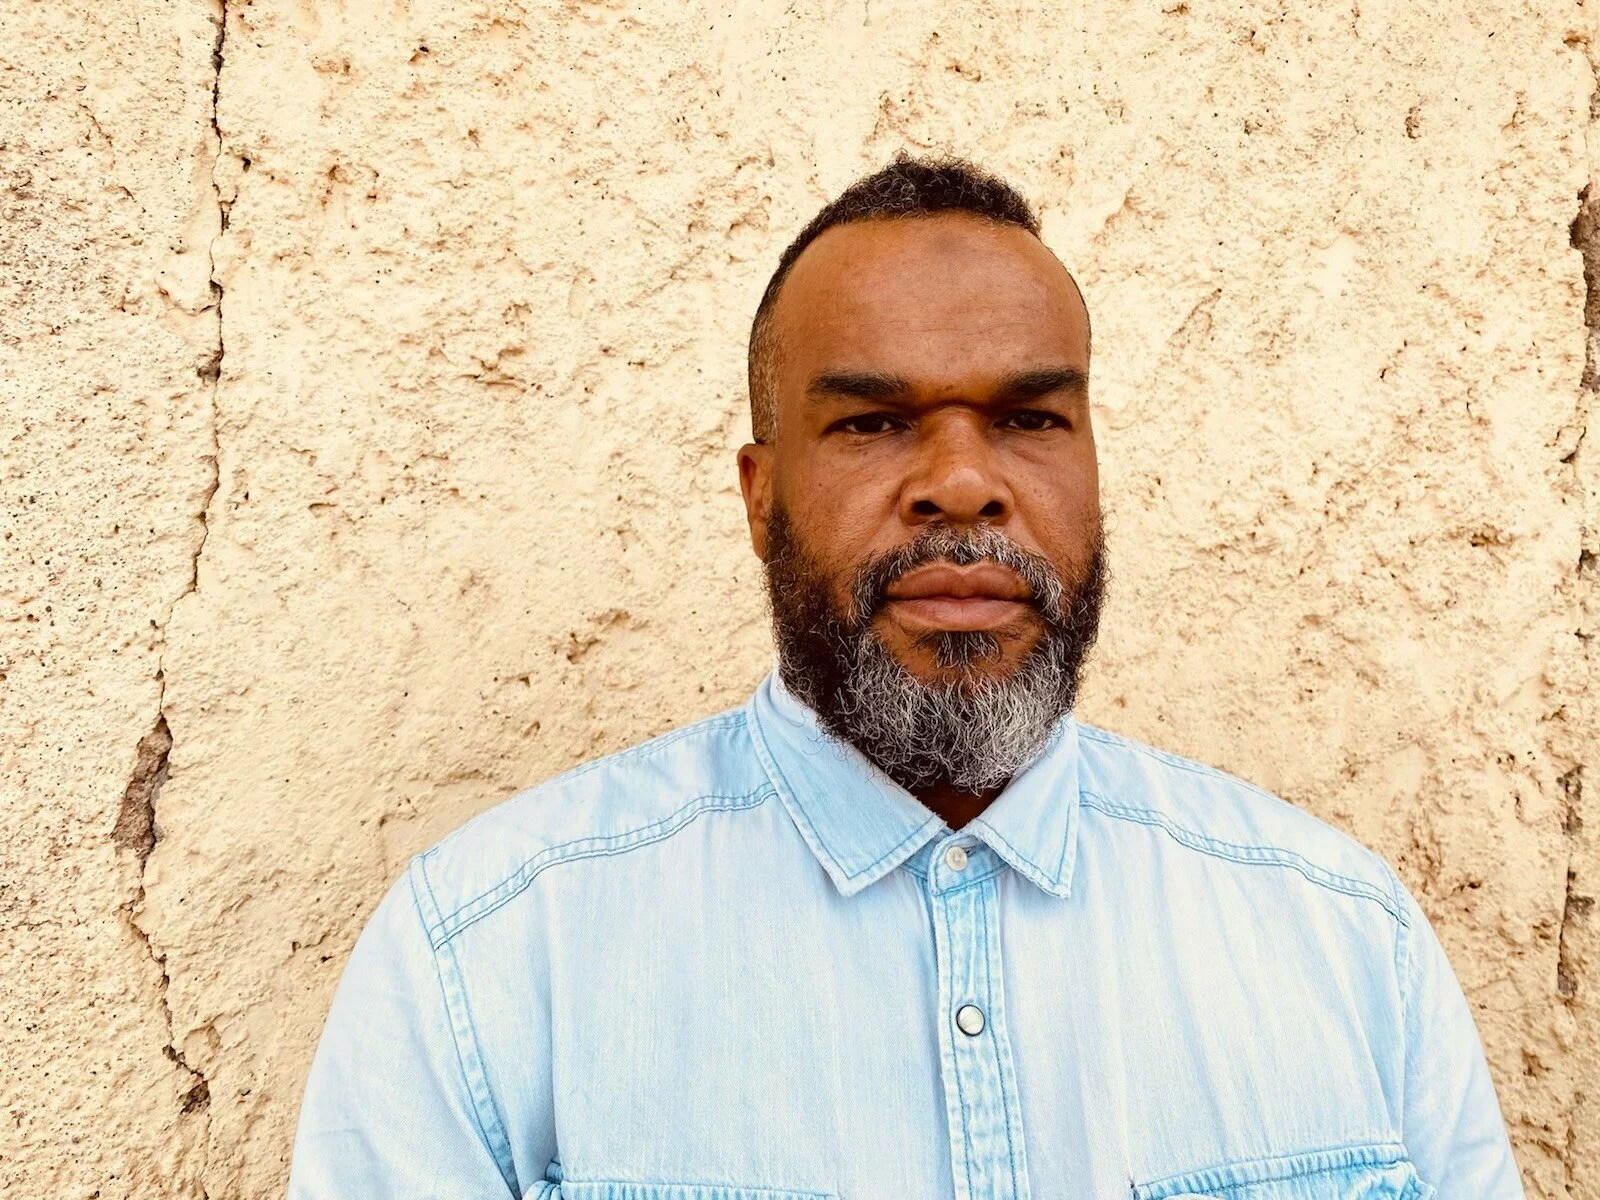 Headshot of Jamal Cyrus, a Black person with a black and white beard, wearing a light blue buttoned up shirt.